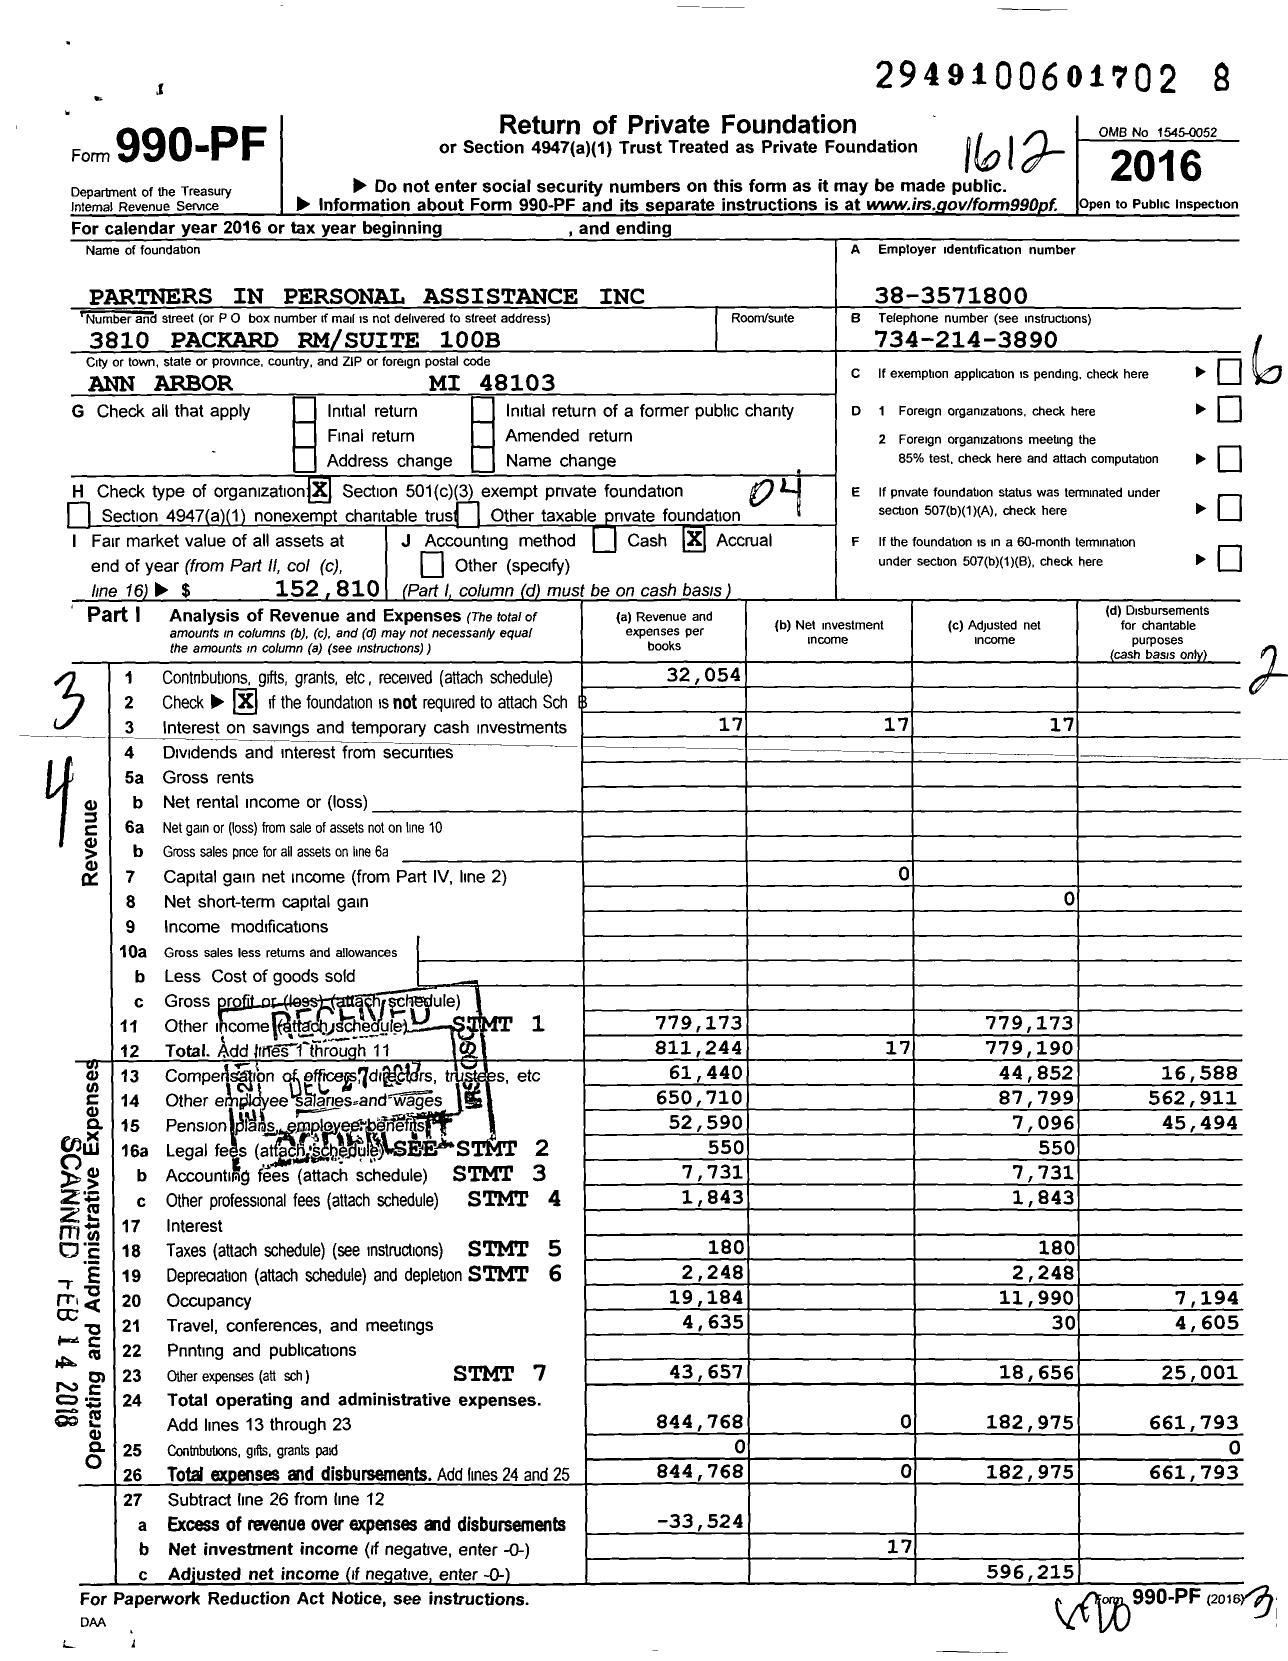 Image of first page of 2016 Form 990PF for Partners in Personal Assistance